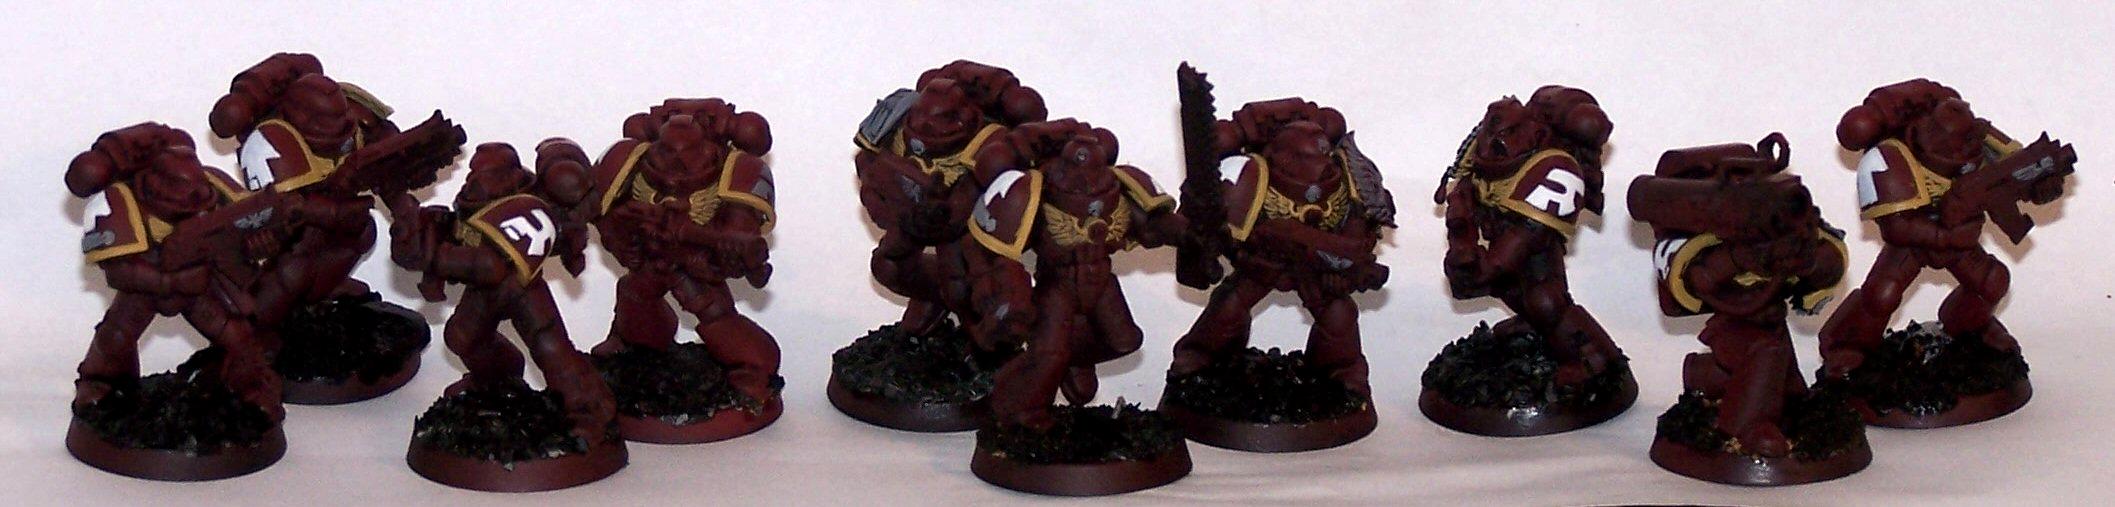 Emperor's Wings, Reaperman2020, Space Marines, Tactical Squad